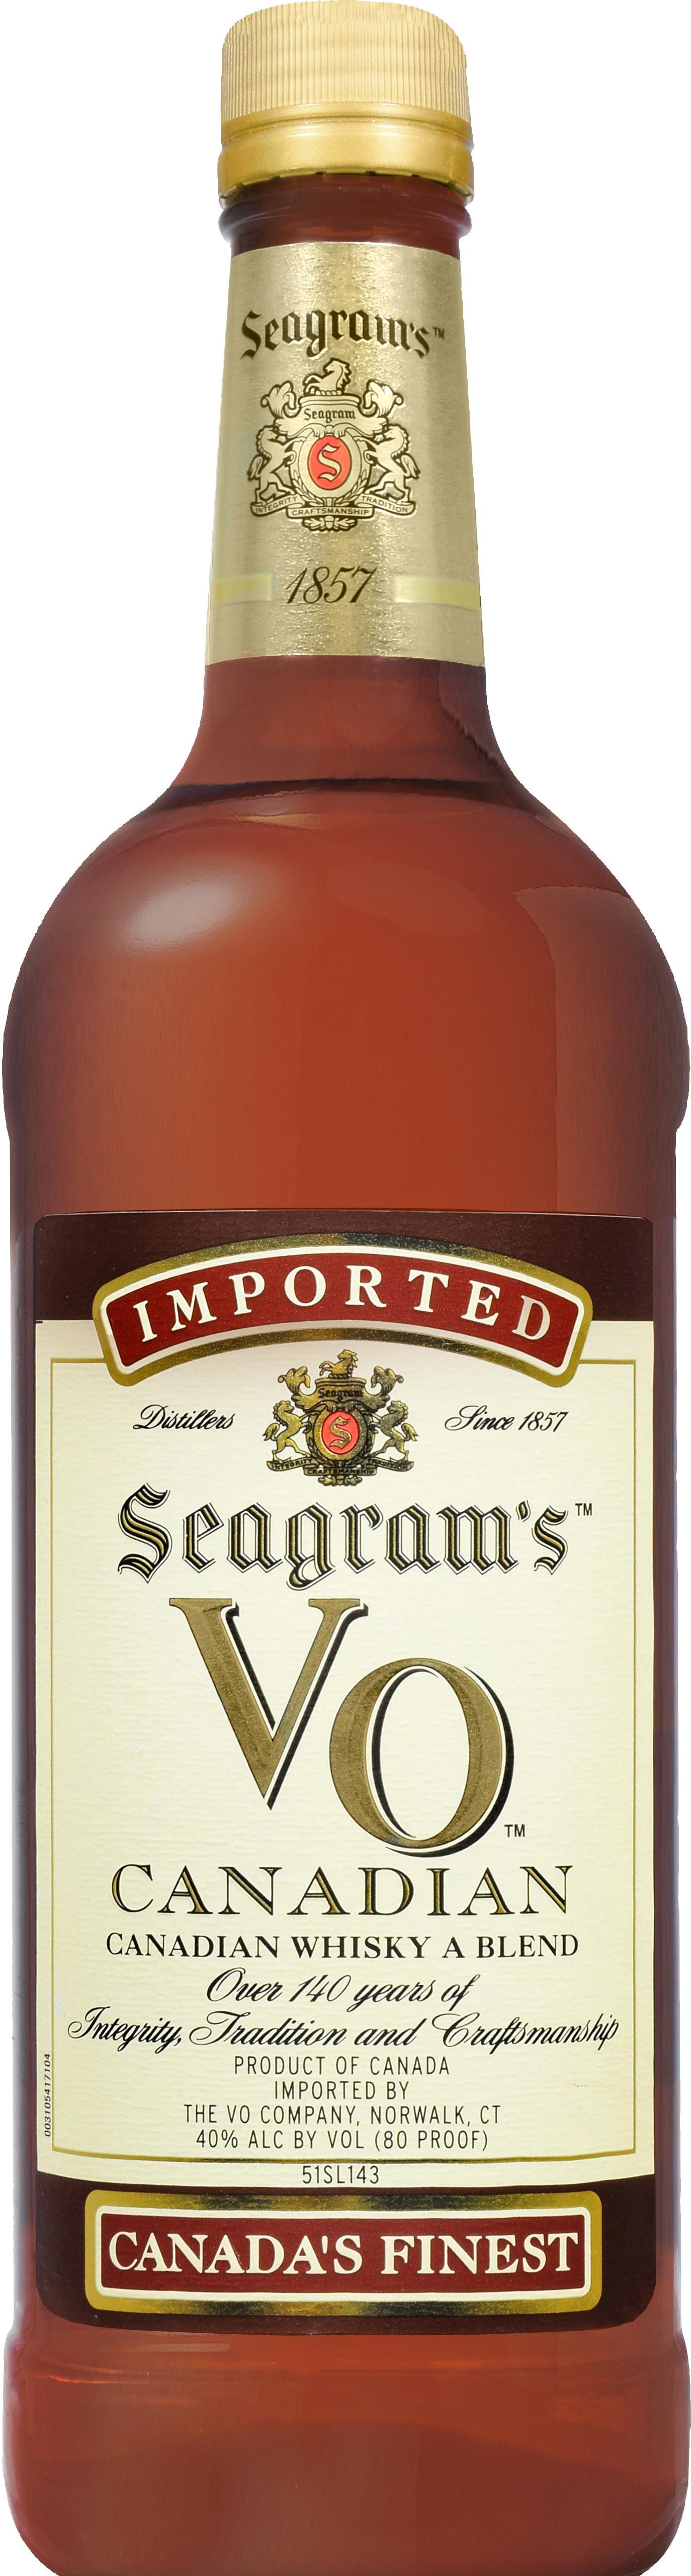 Seagrams VO Canadian Whisky 1L